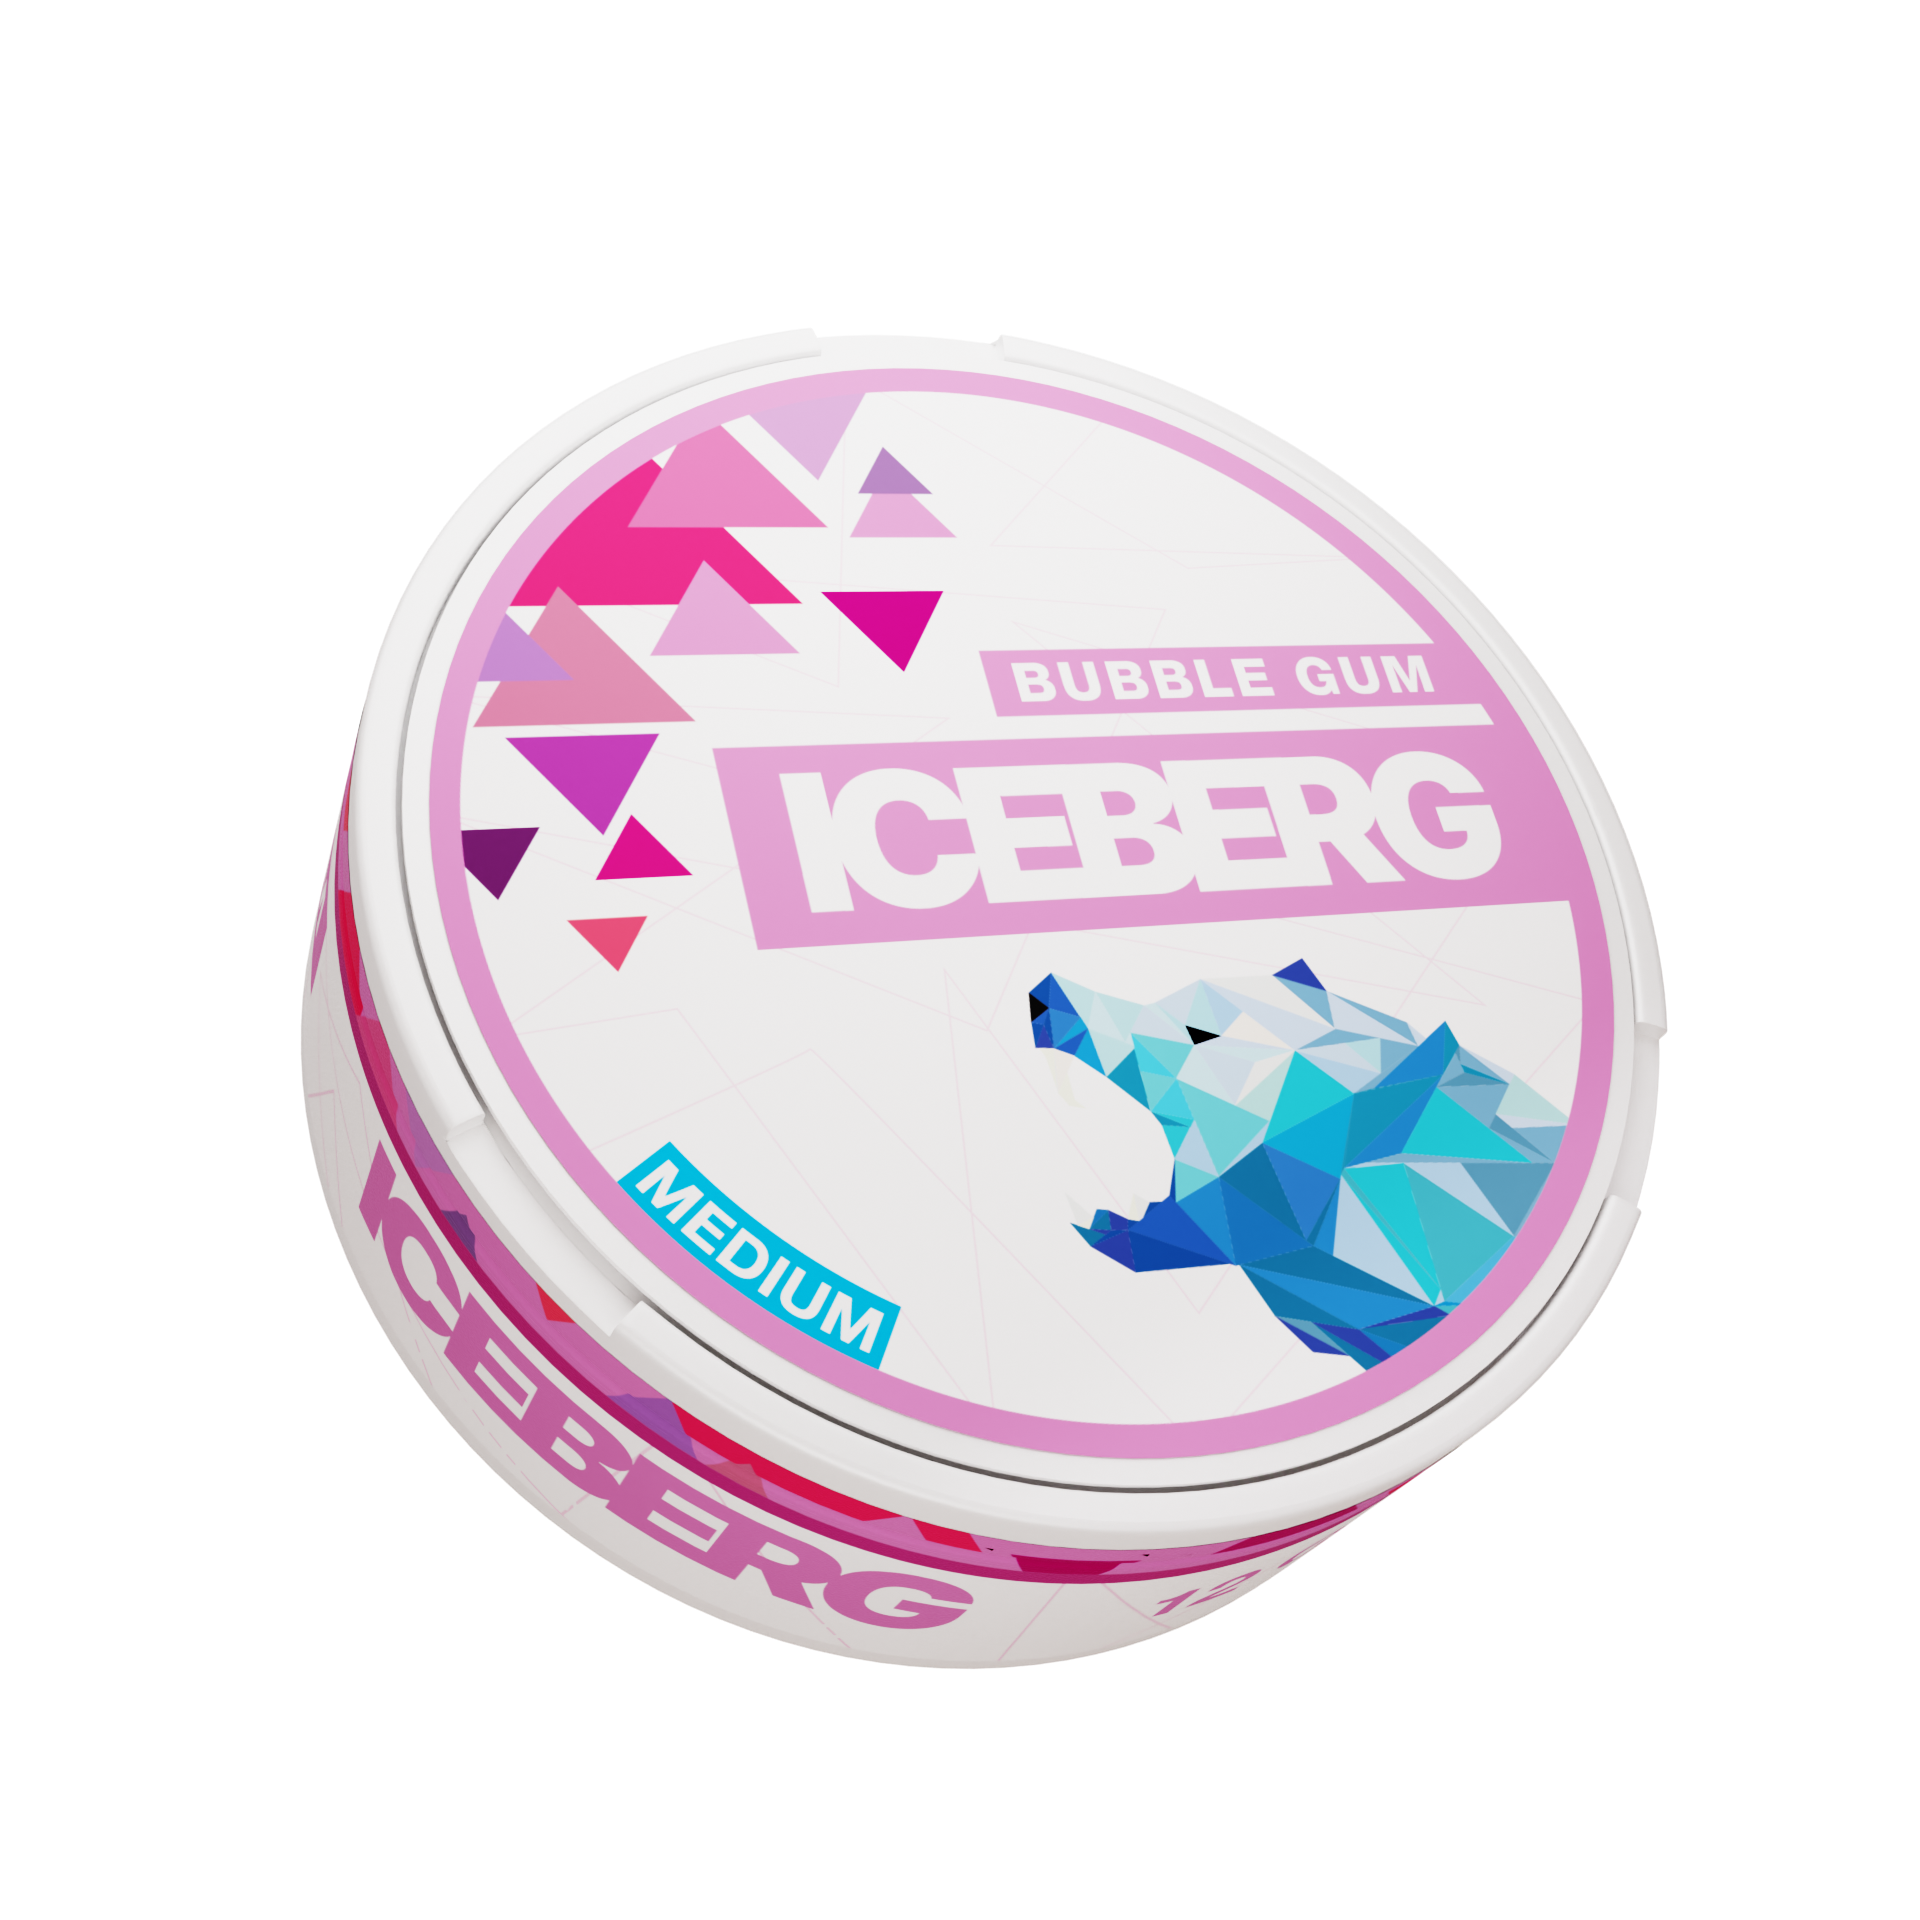 Buy Iceberg Bubblegum 20mg | Low Prices And Fast Delivery